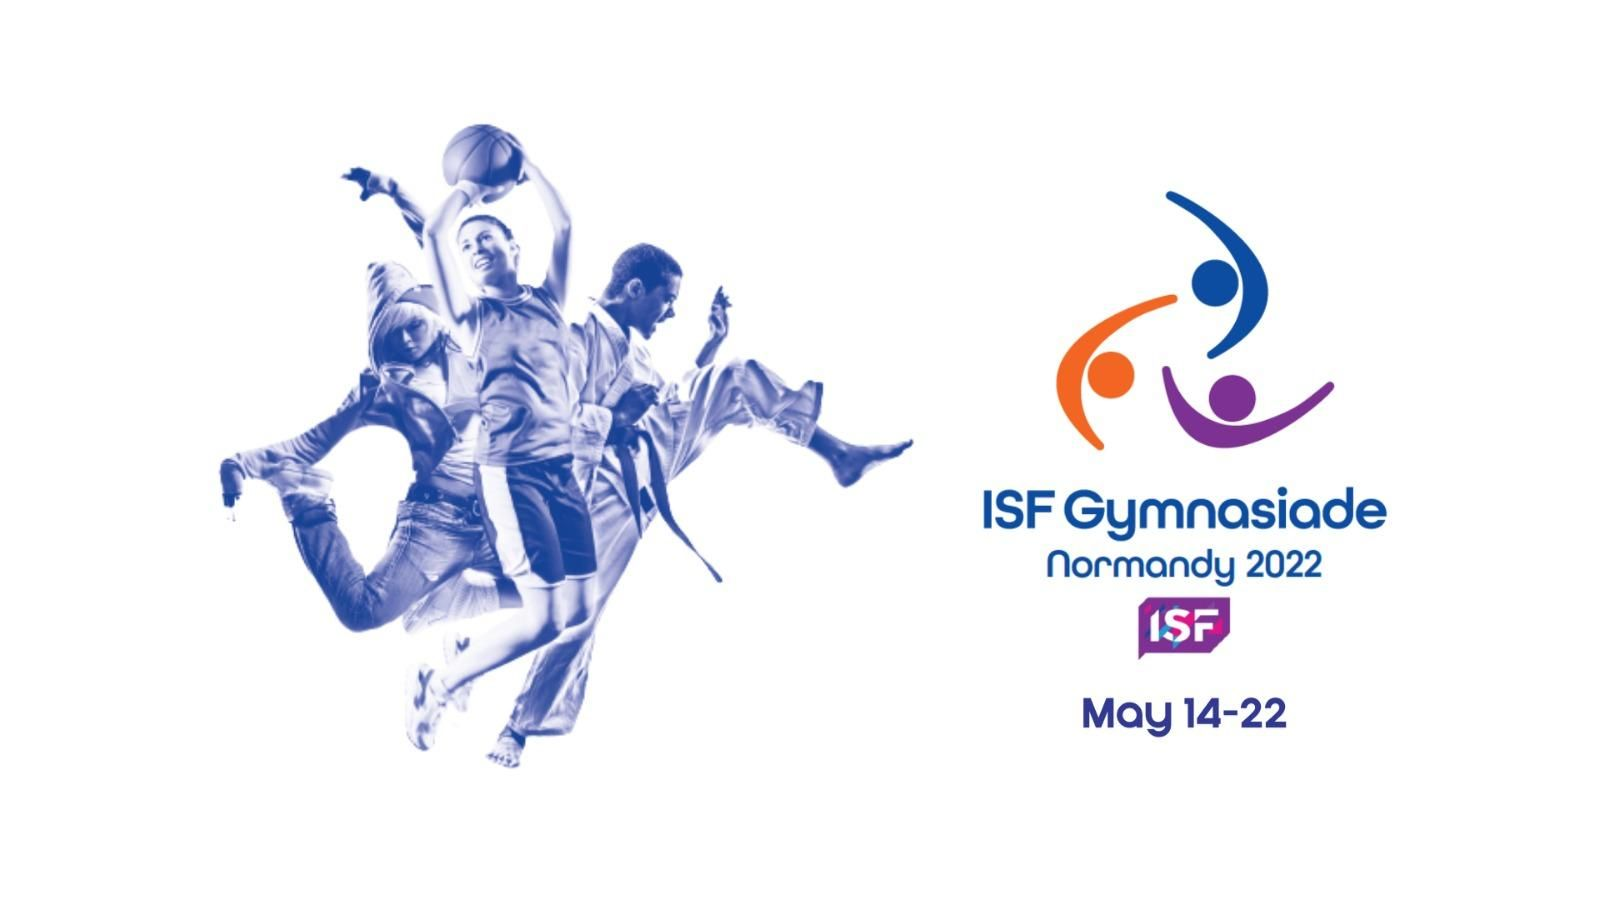 Cities across Normandy are set to host ISF Gymnasiade events ©ISF